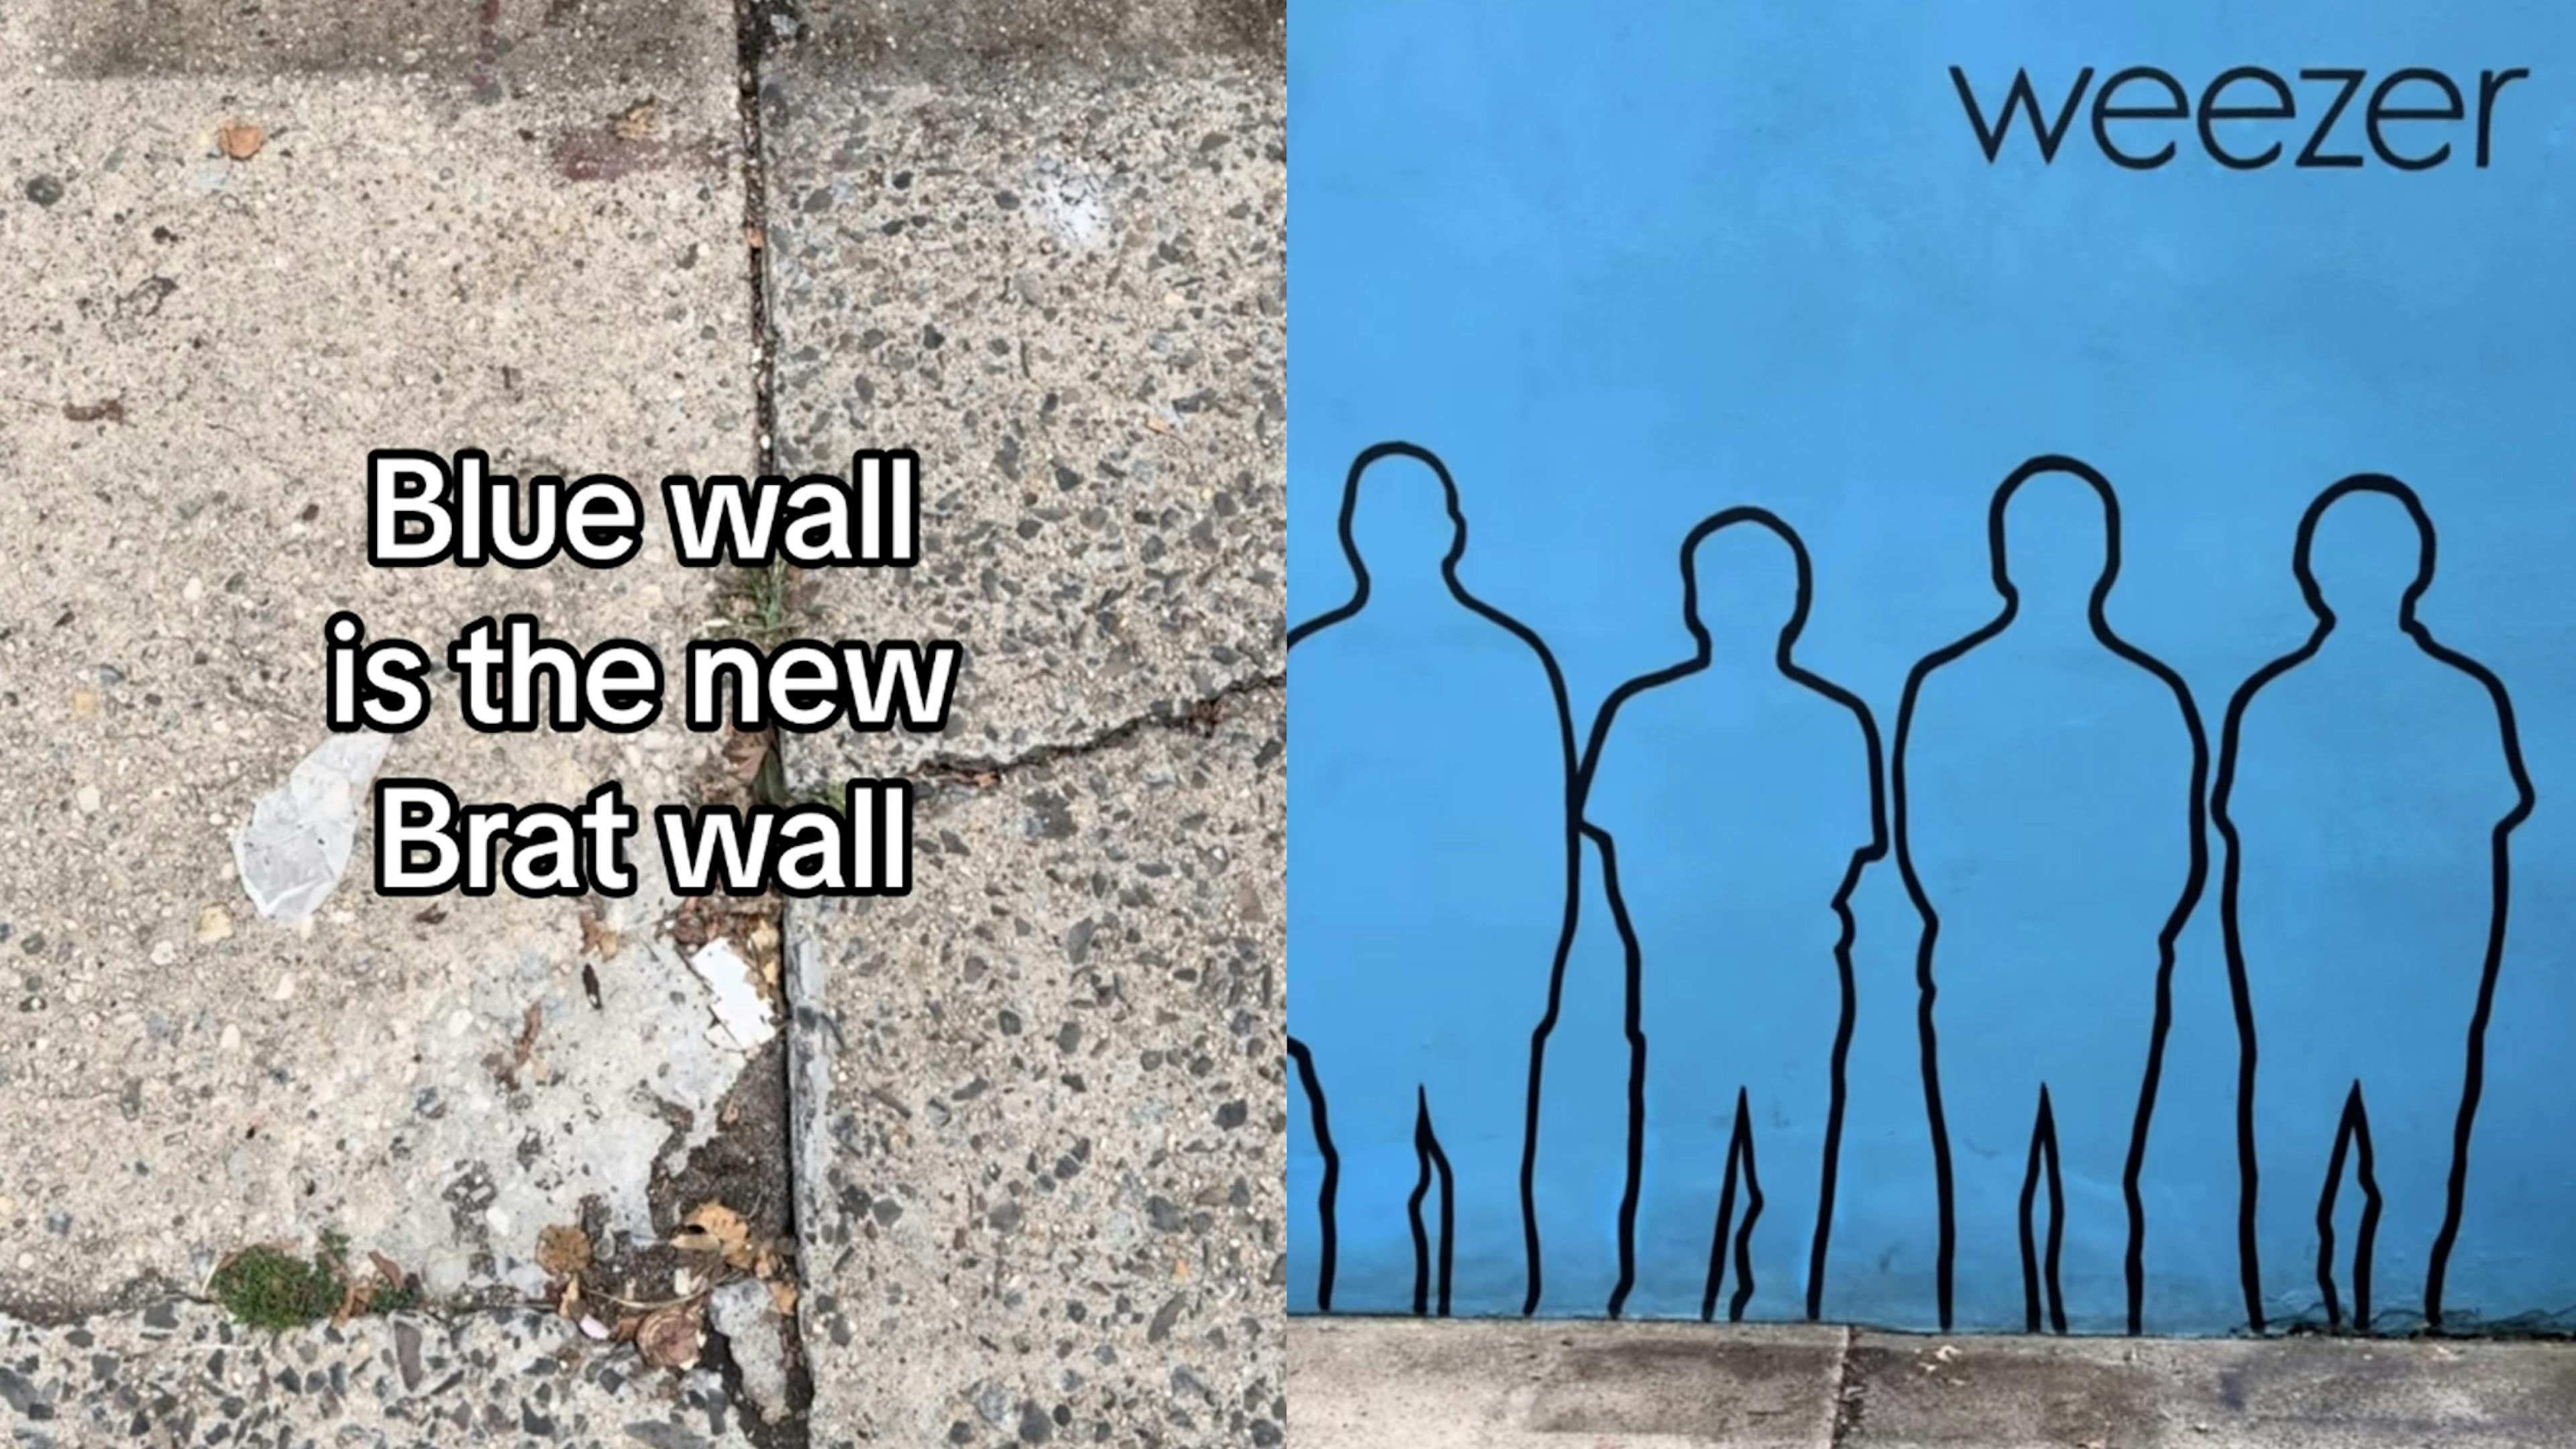 Weezer have their own Blue Album-themed Brat wall in Brooklyn